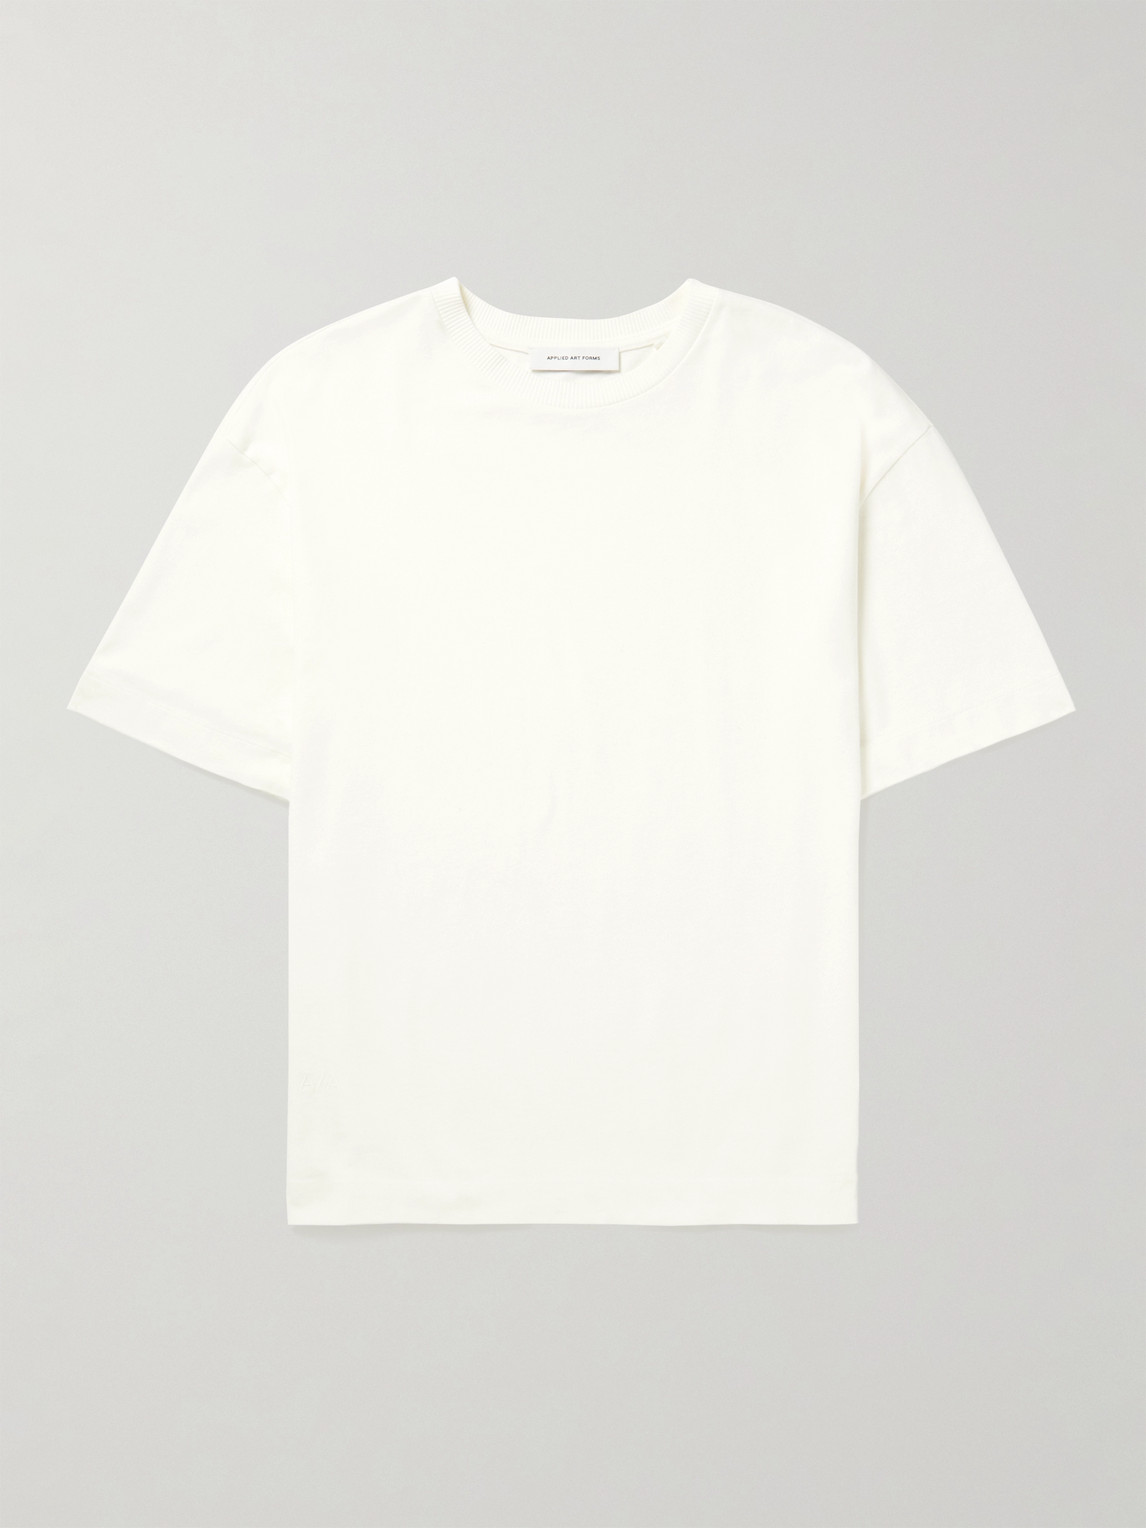 Applied Art Forms Lm1-4 Cotton-jersey T-shirt In Neutrals